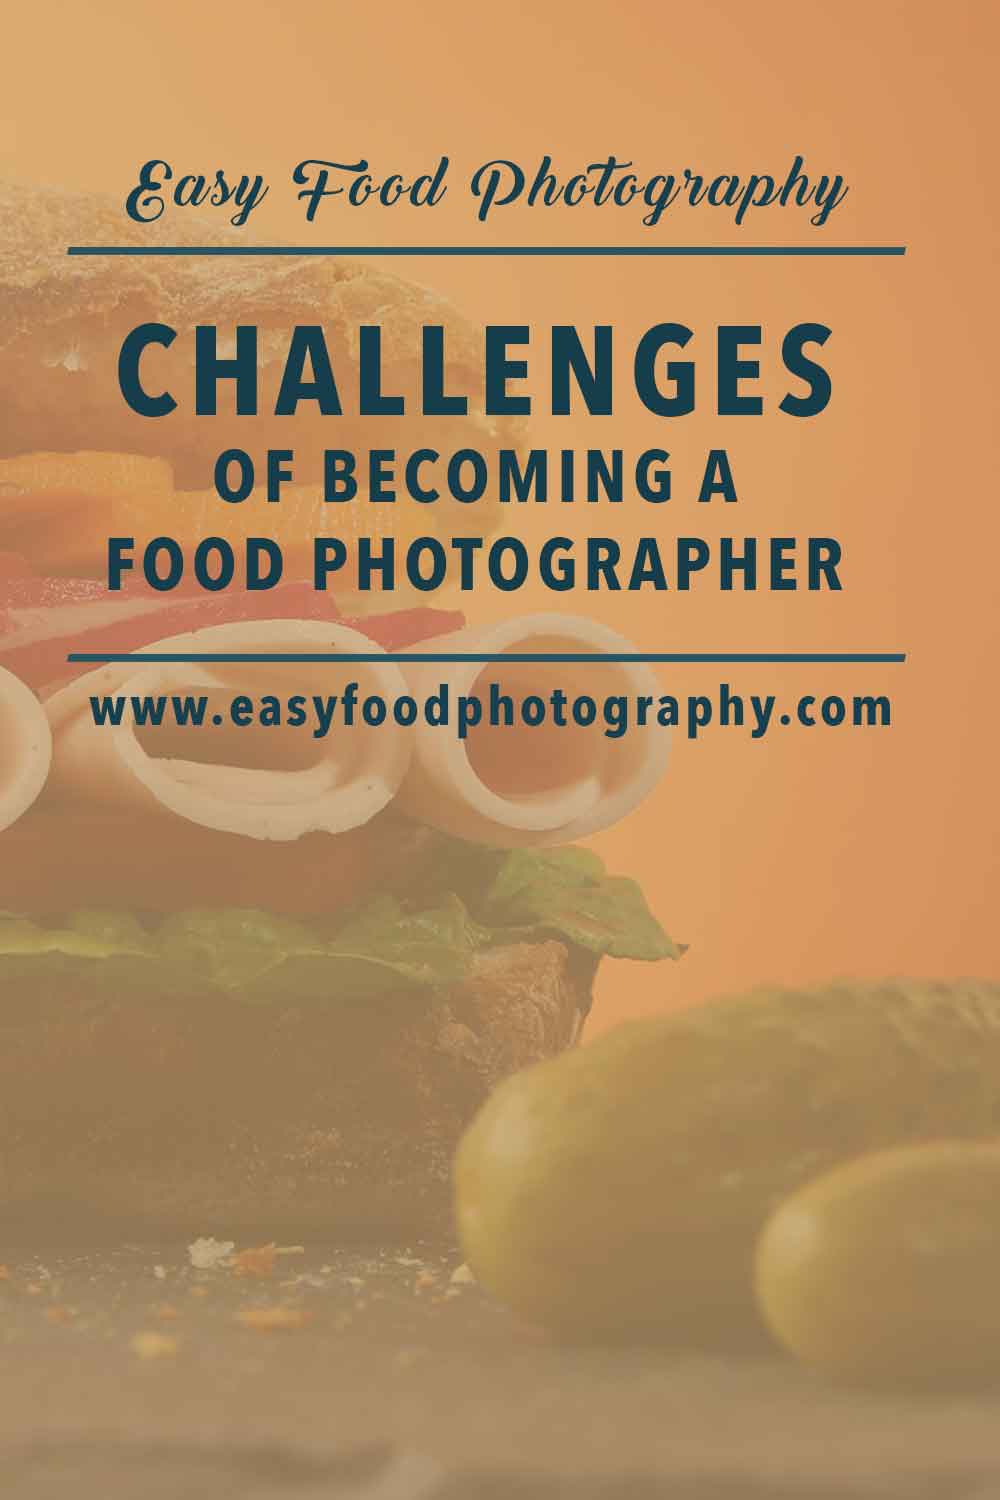 THE CHALLENGES OF BECOMING A FOOD PHOTOGRAPHER